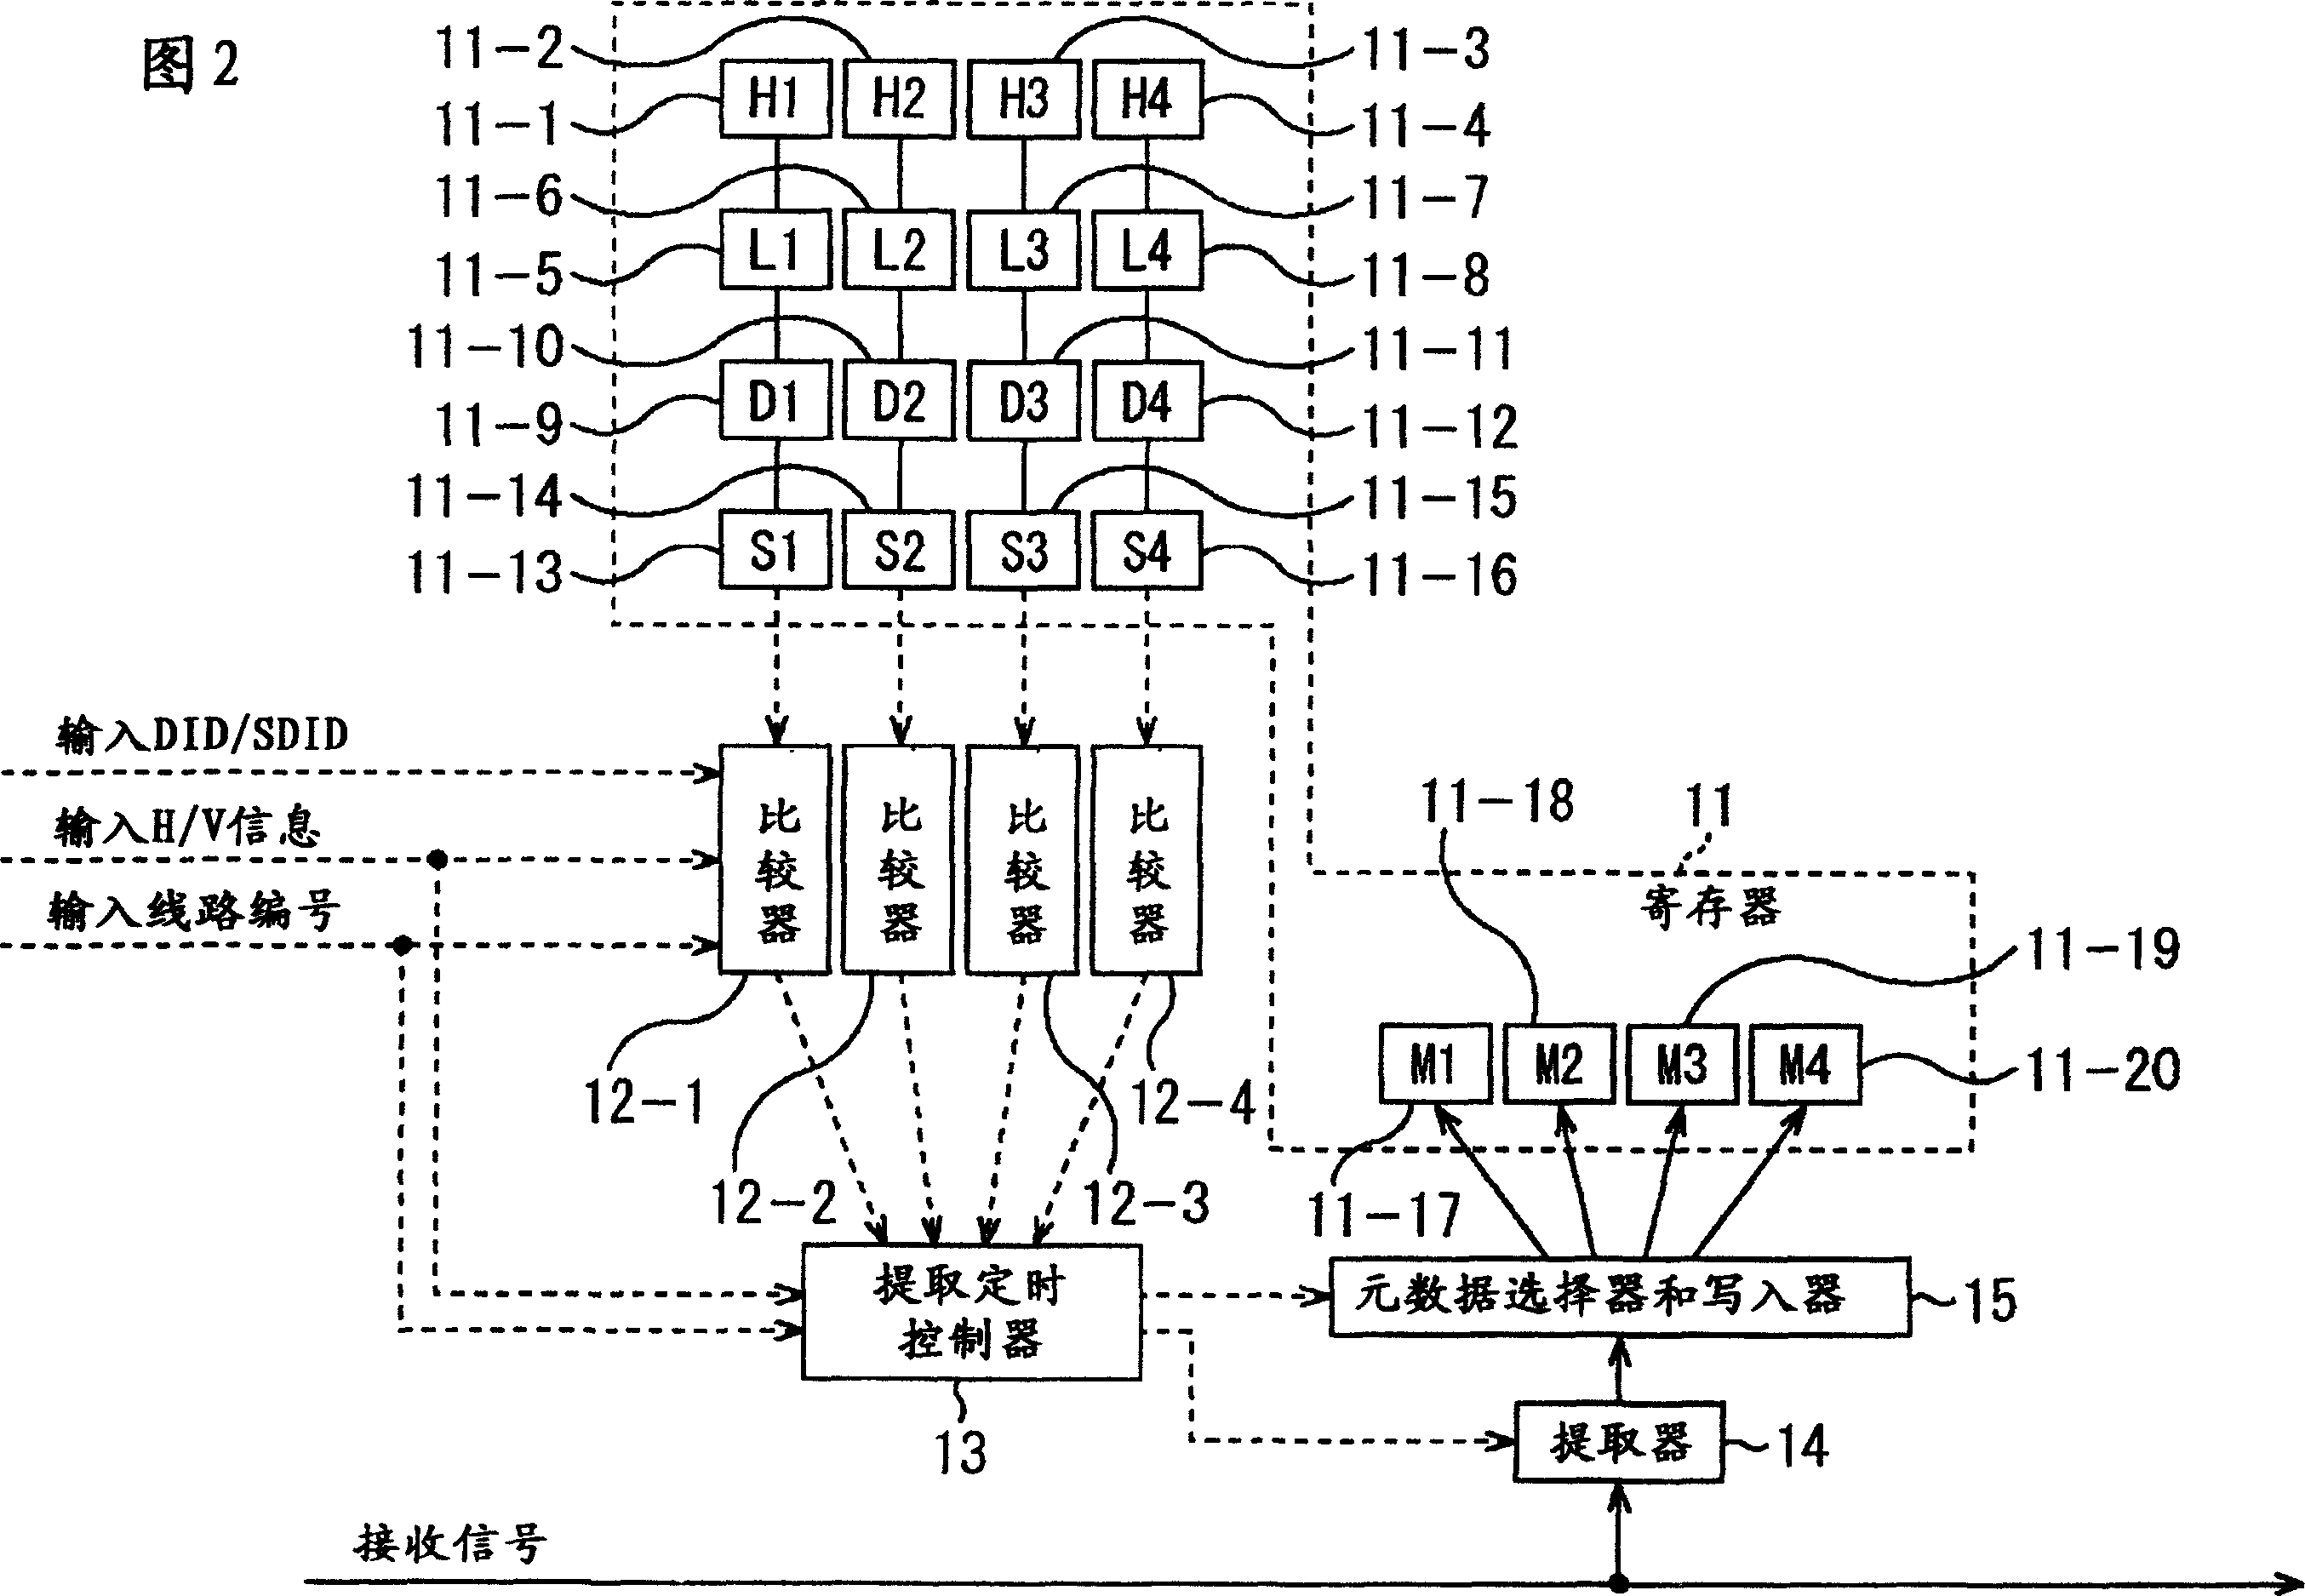 Method and system for transmission and reception, method and apparatus for transmission, and method and apparatus for reception, and program